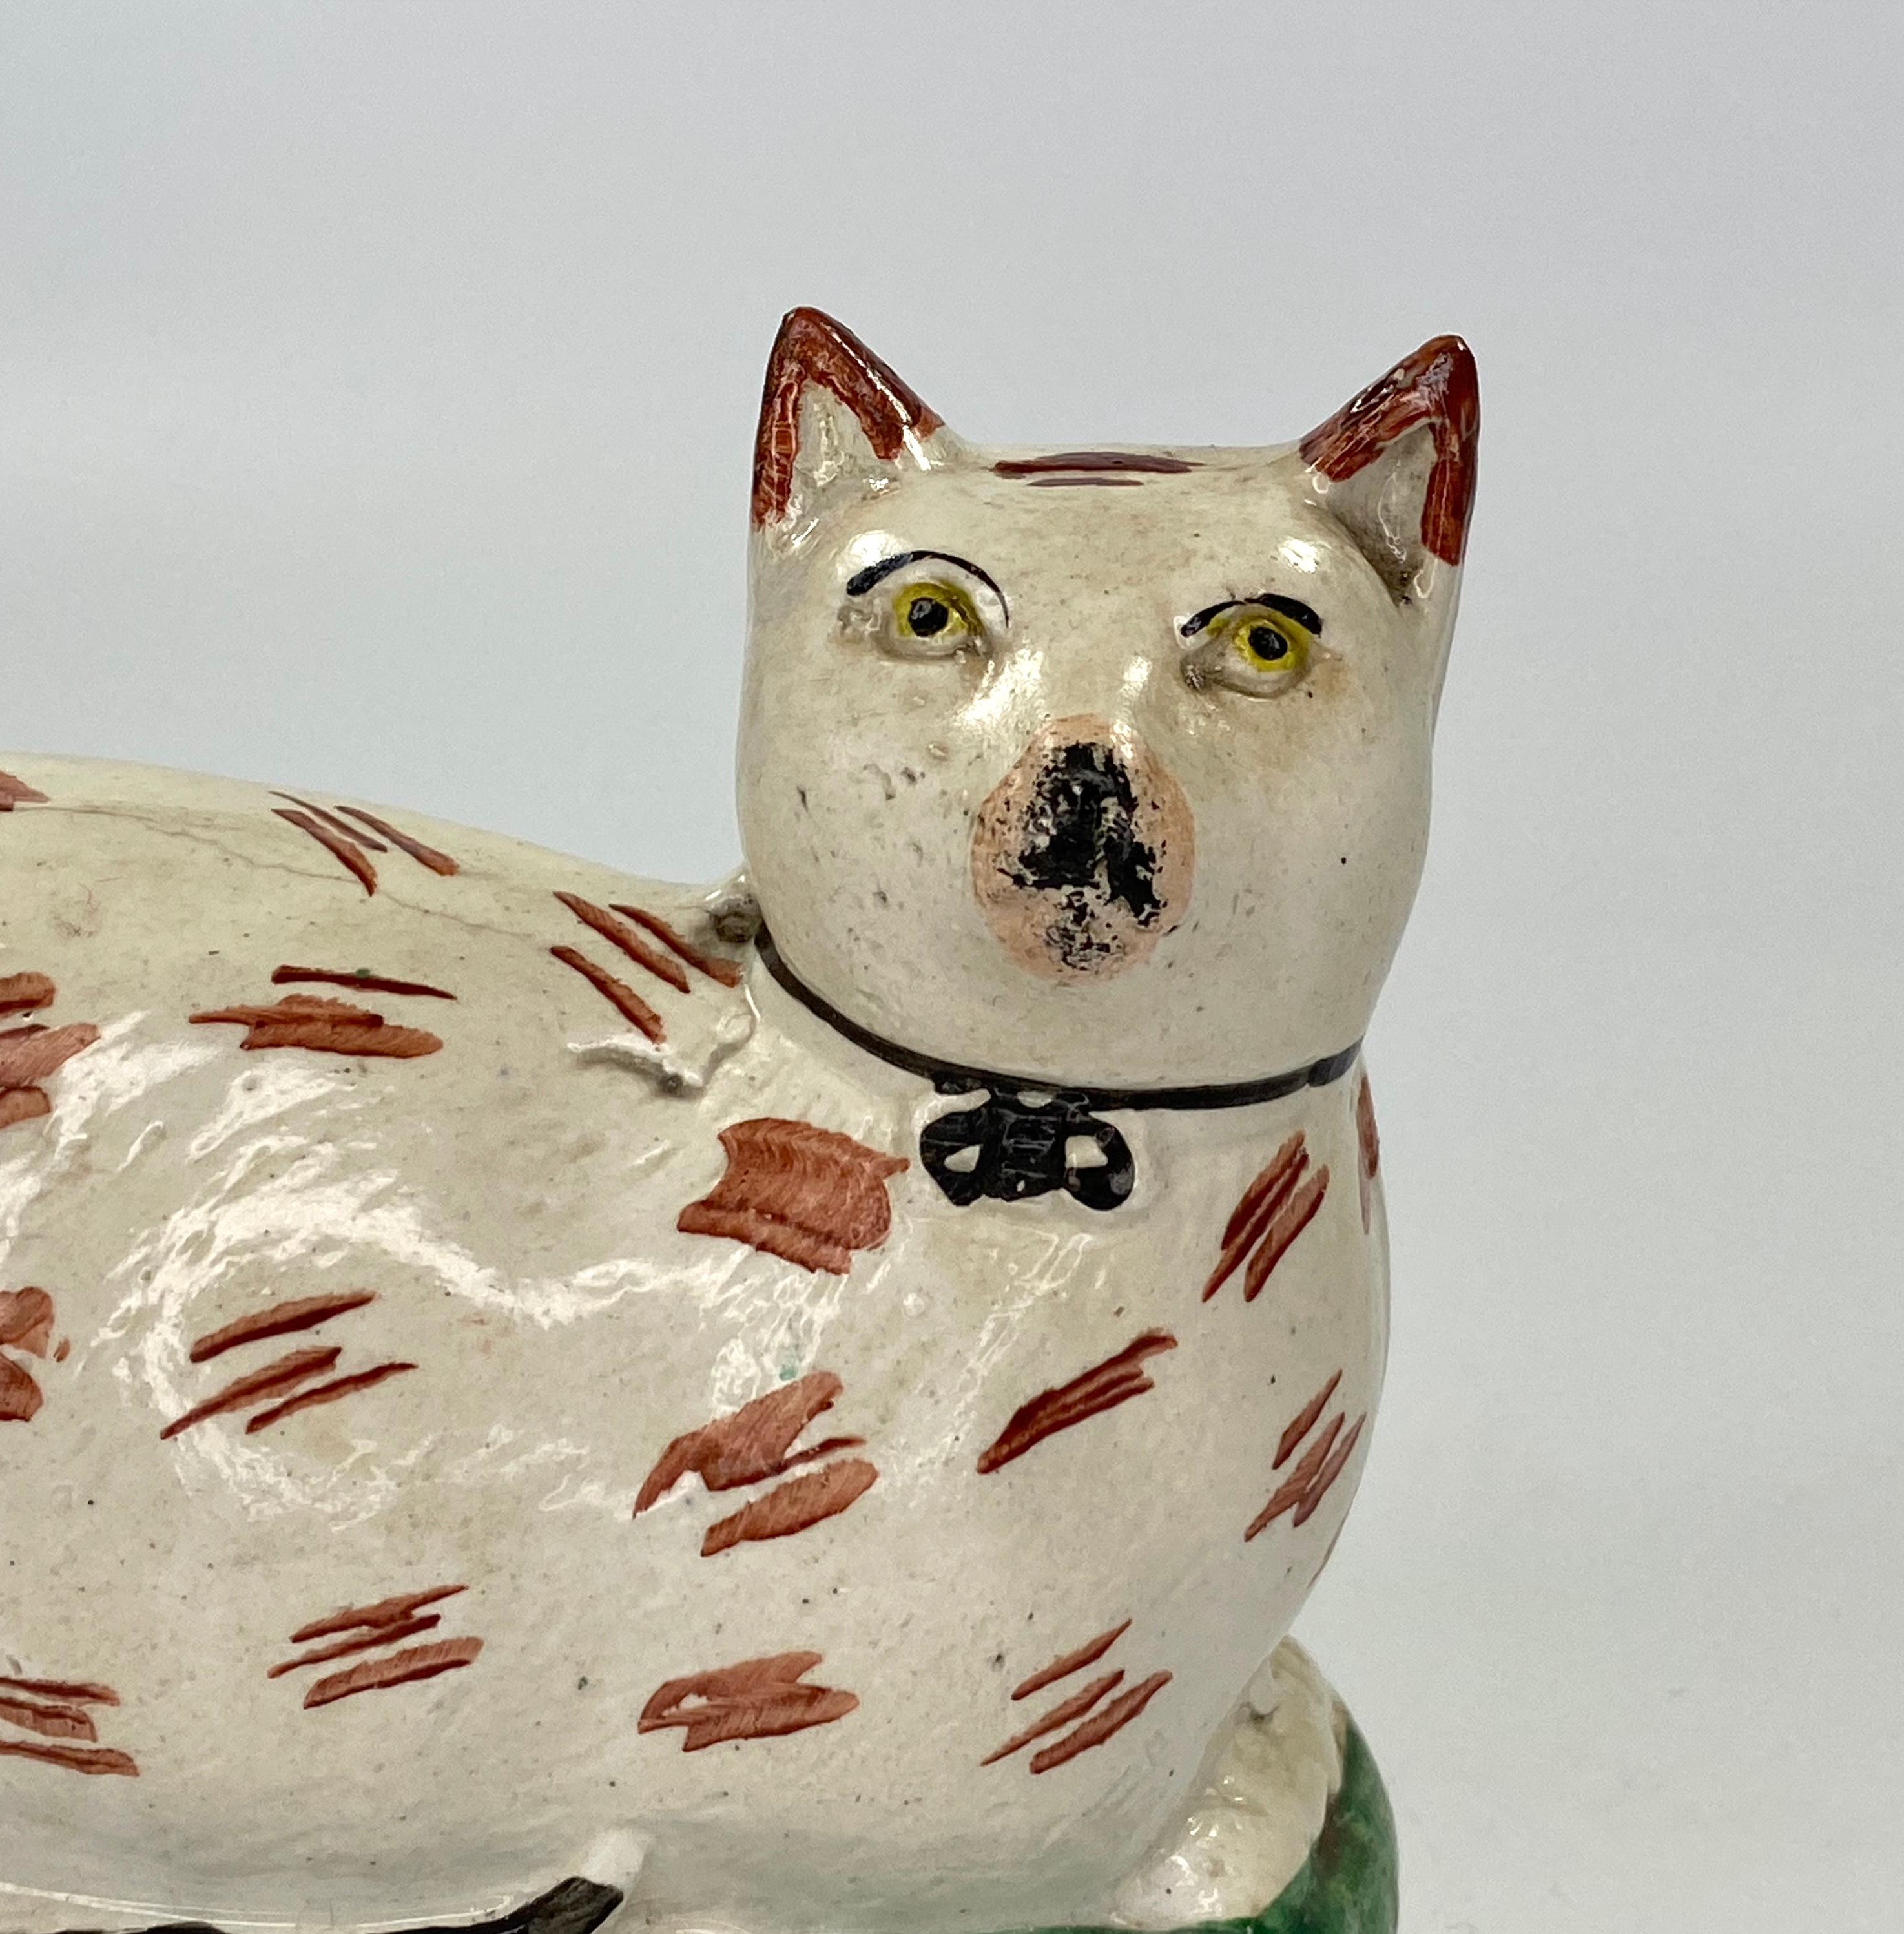 £580.00
Staffordshire pottery figure, circa 1860. Modelled as a recumbent cat, upon an oval mound base. The cat having yellow eyes and brown colouring to it’s coat, lying upon a grassy base.
Medium: Earthenware.
Measures: Height 12.7 cm,